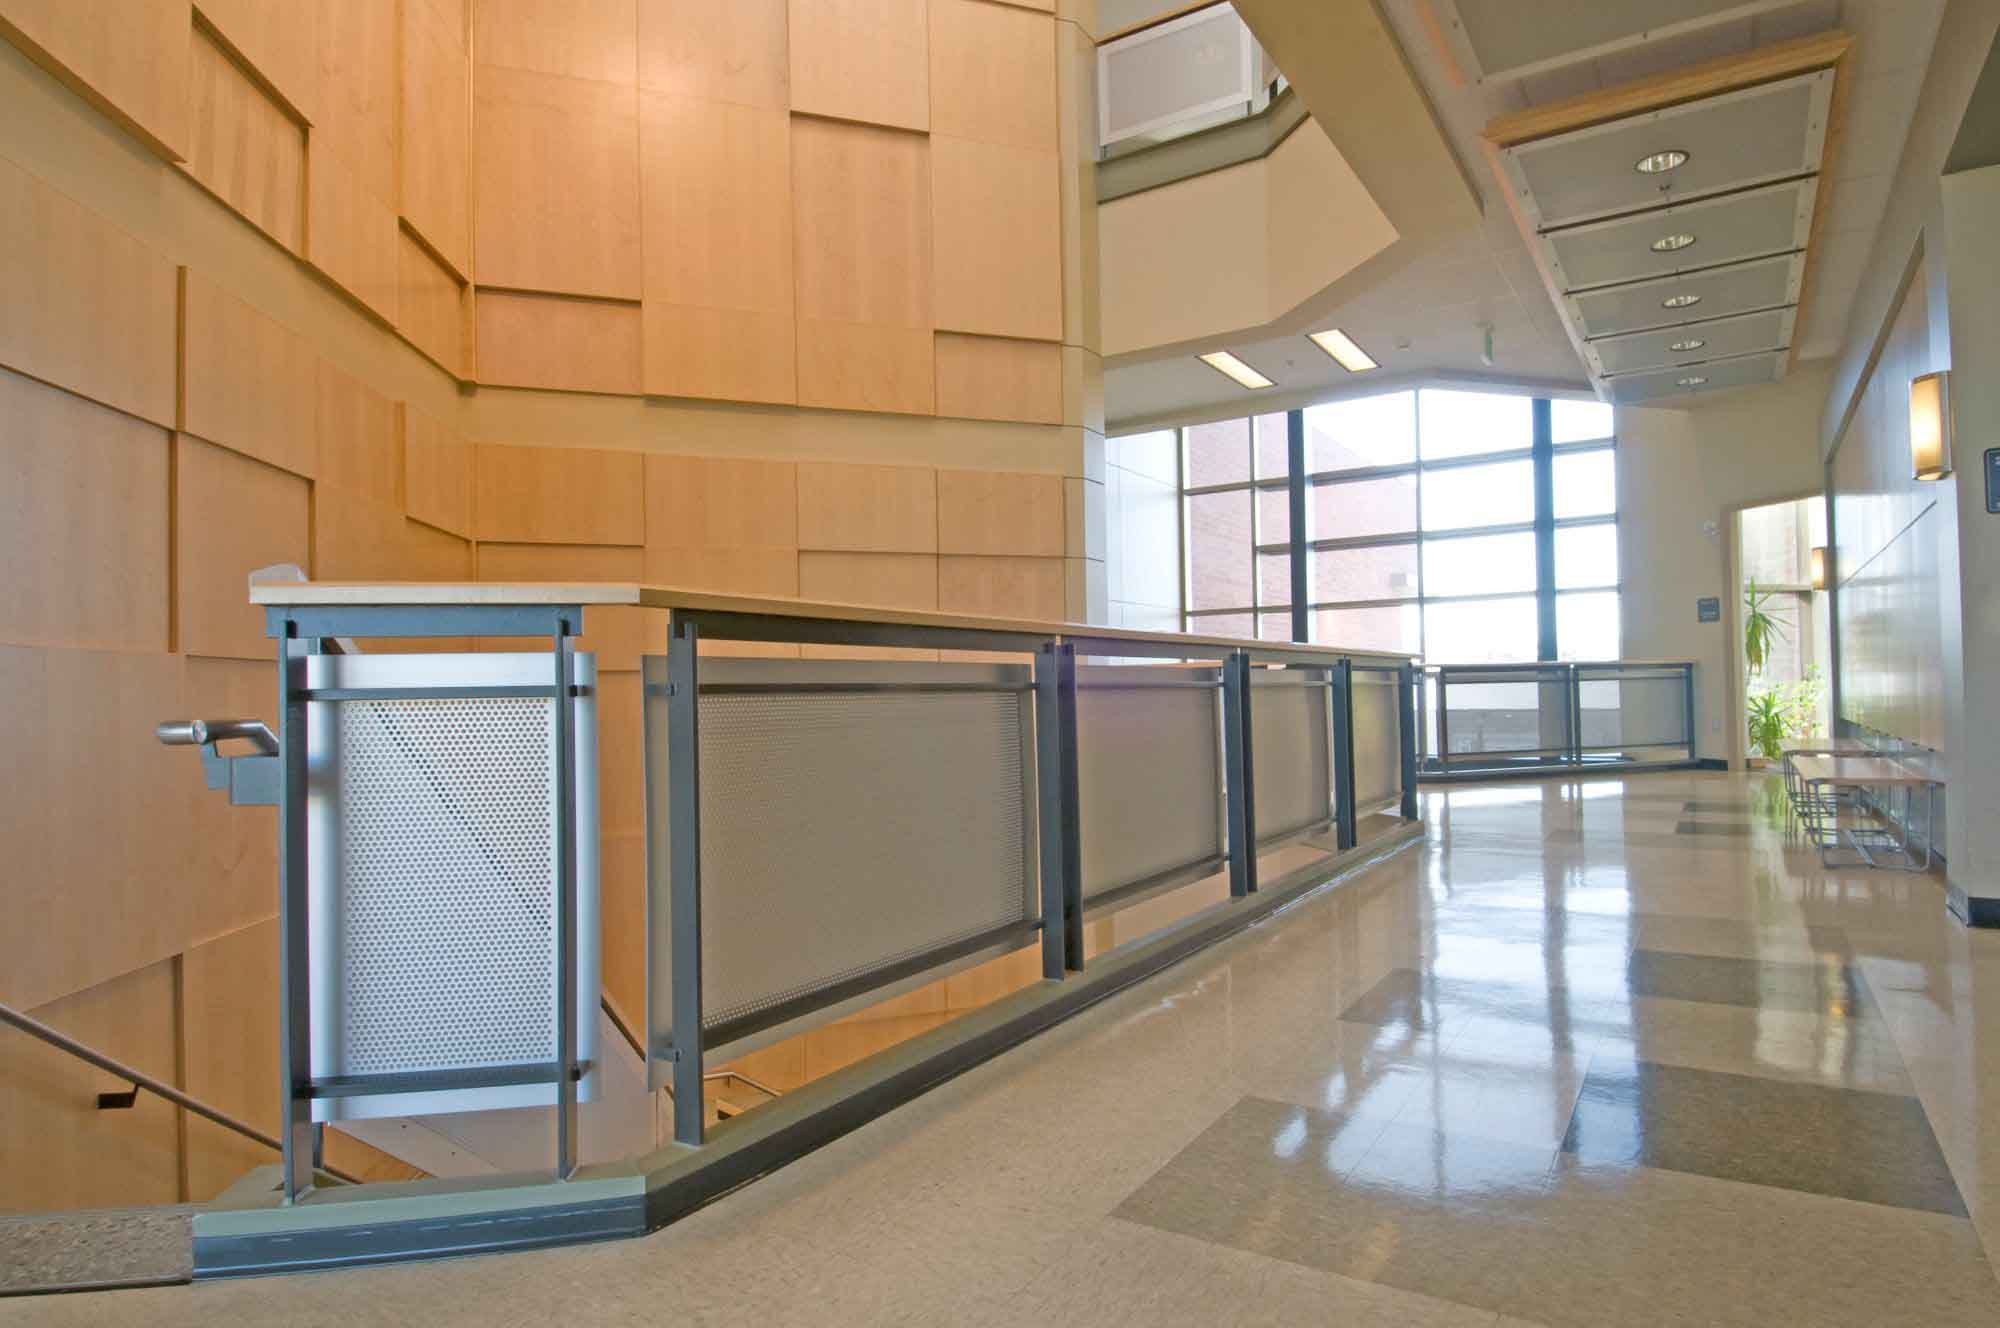 A picture of balcony and staircase railings that have Perforated Metal Infill Panels inside The Science and Mathematics Building at Spokane Community College.